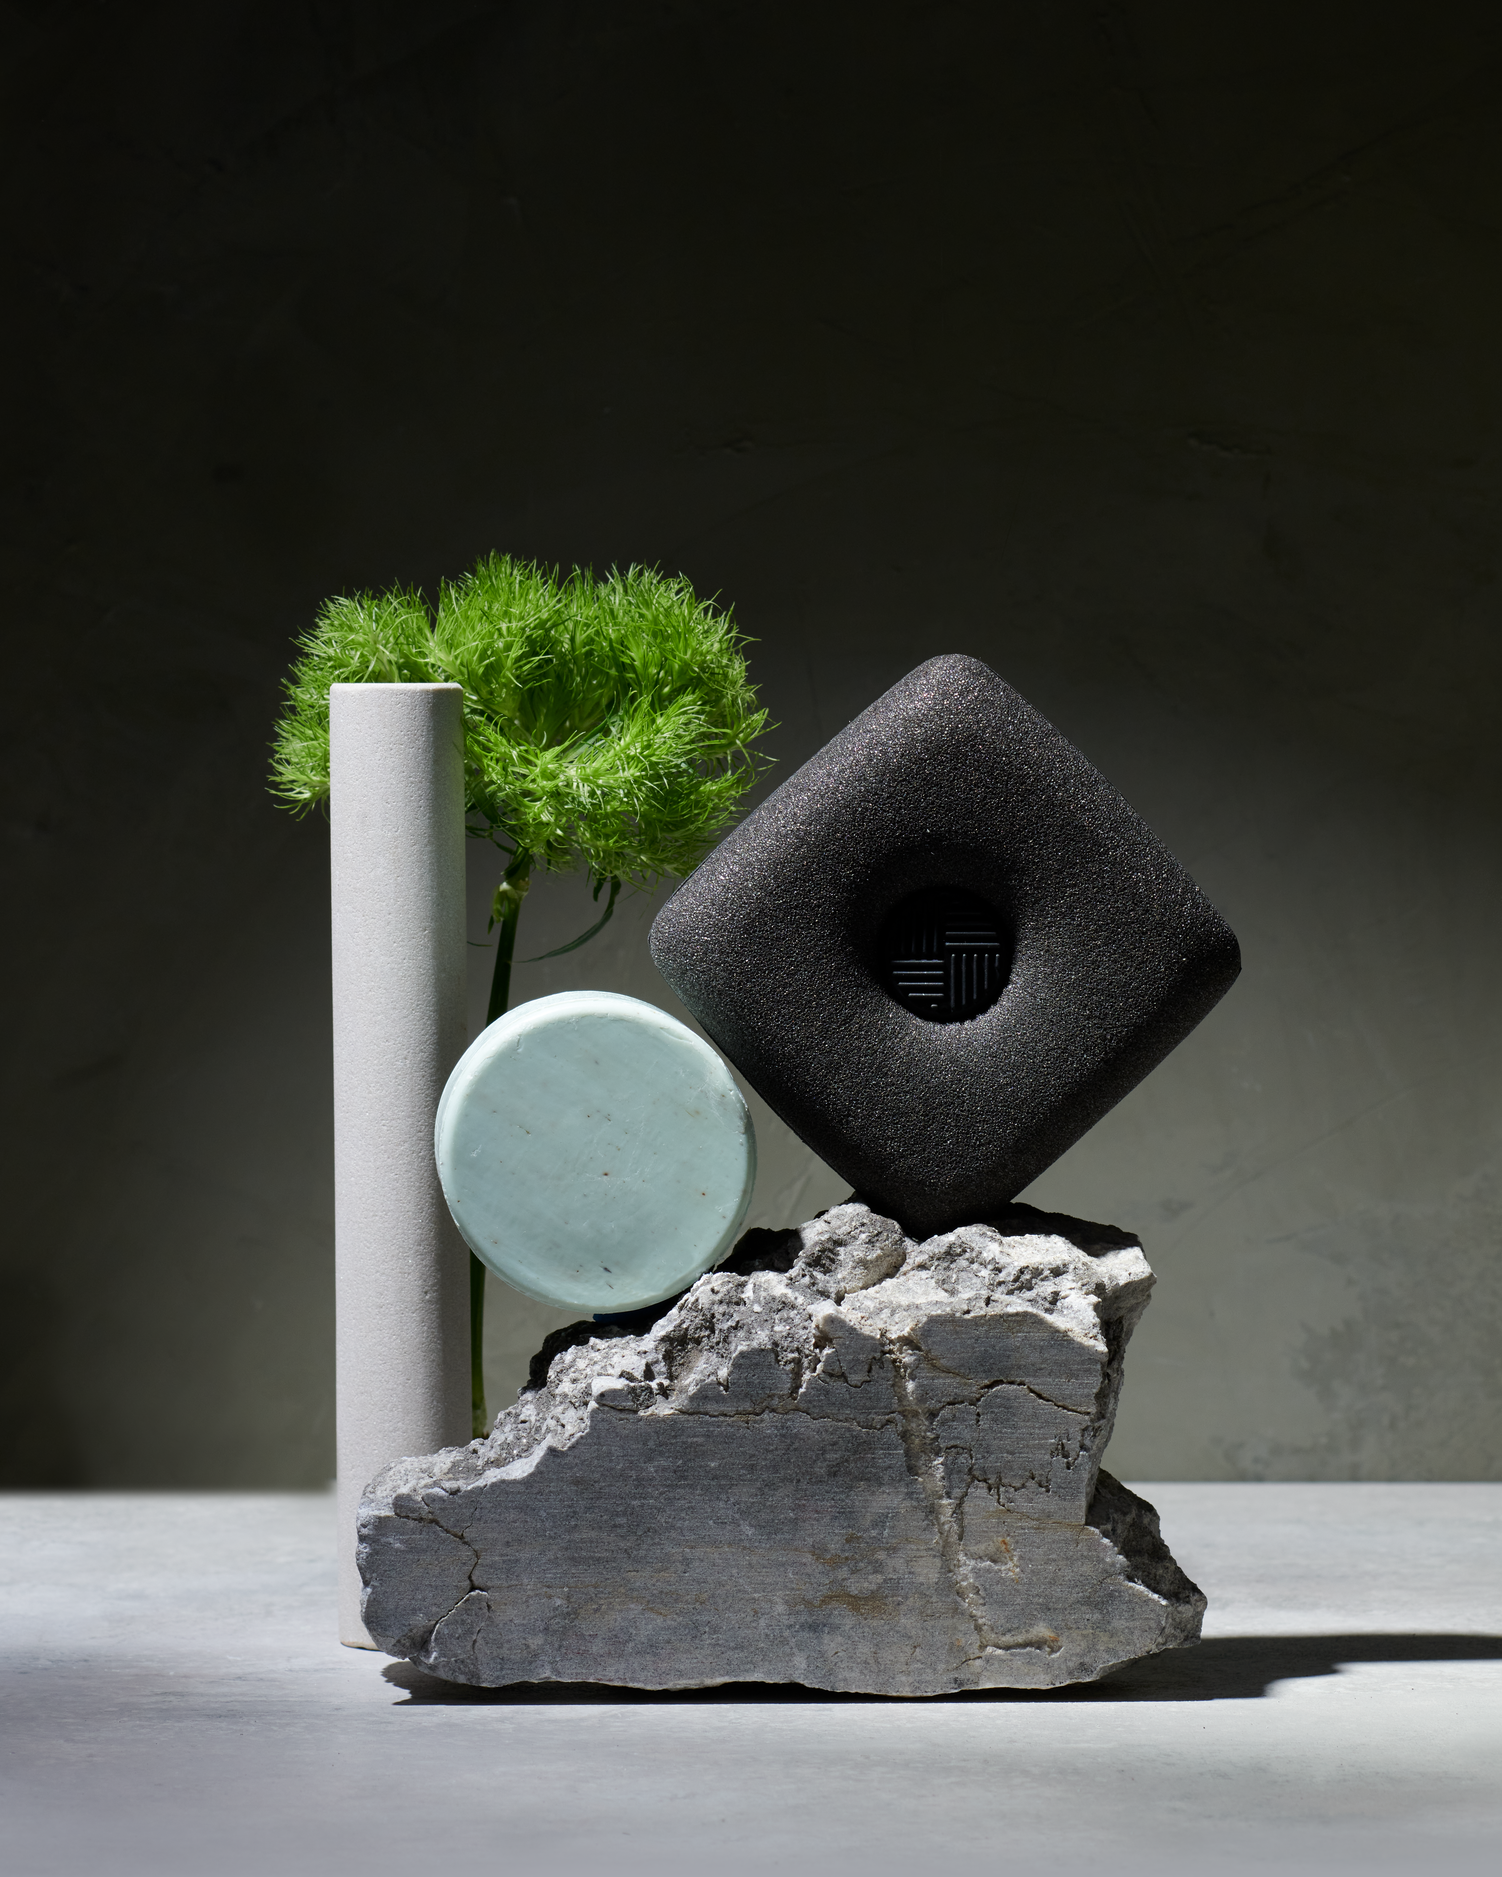 Curio Homegoods Ionic Counter Sponge with dark background and rocks